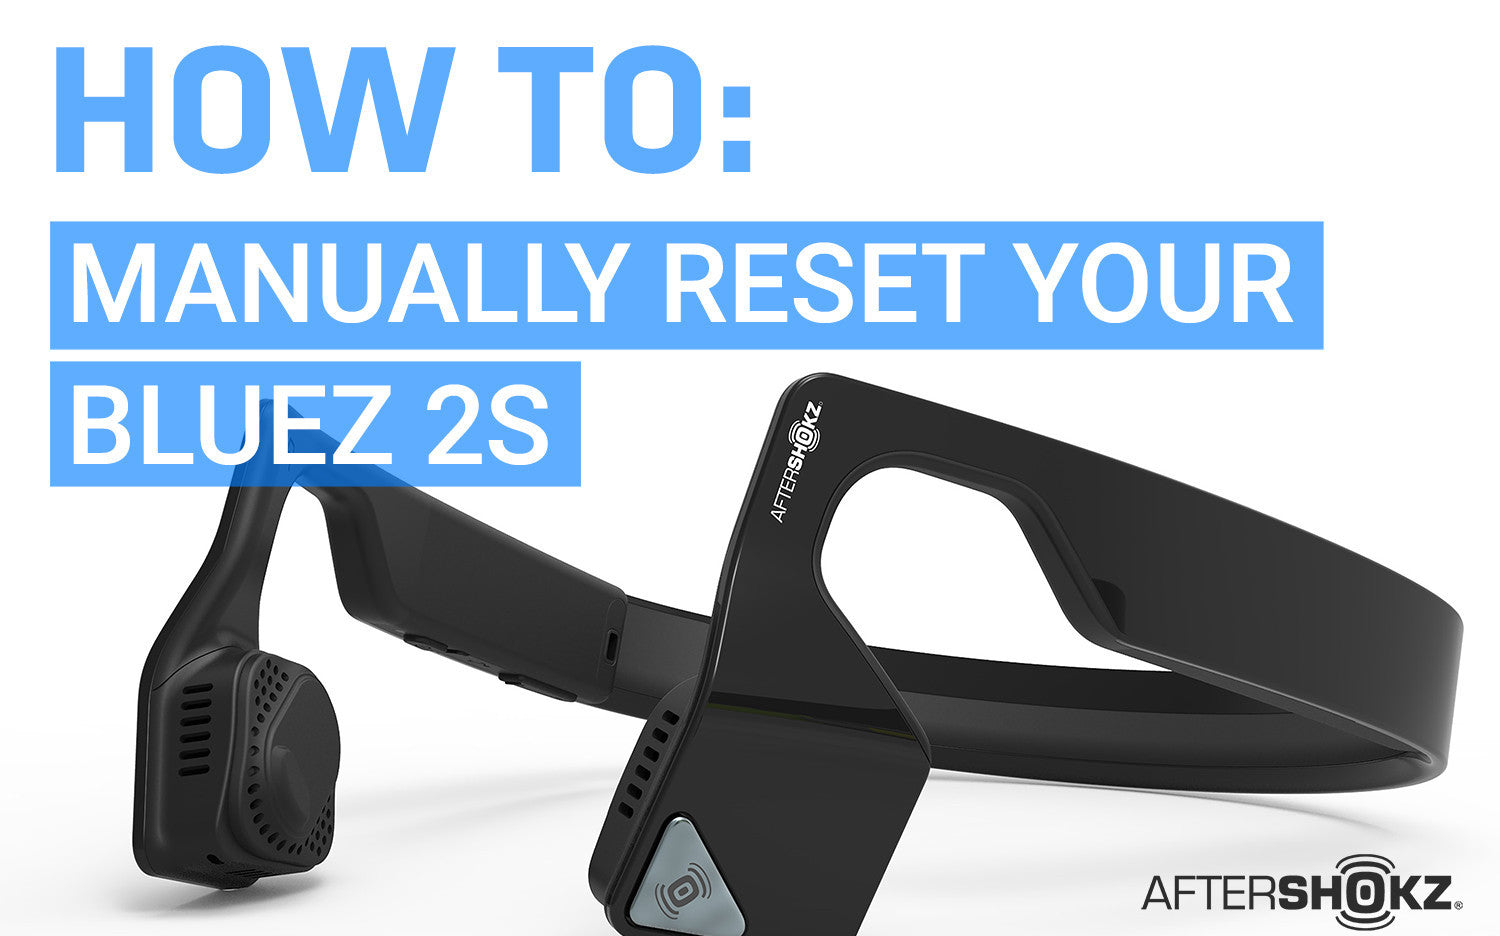 How to: Manually Reset Your Bluez 2S